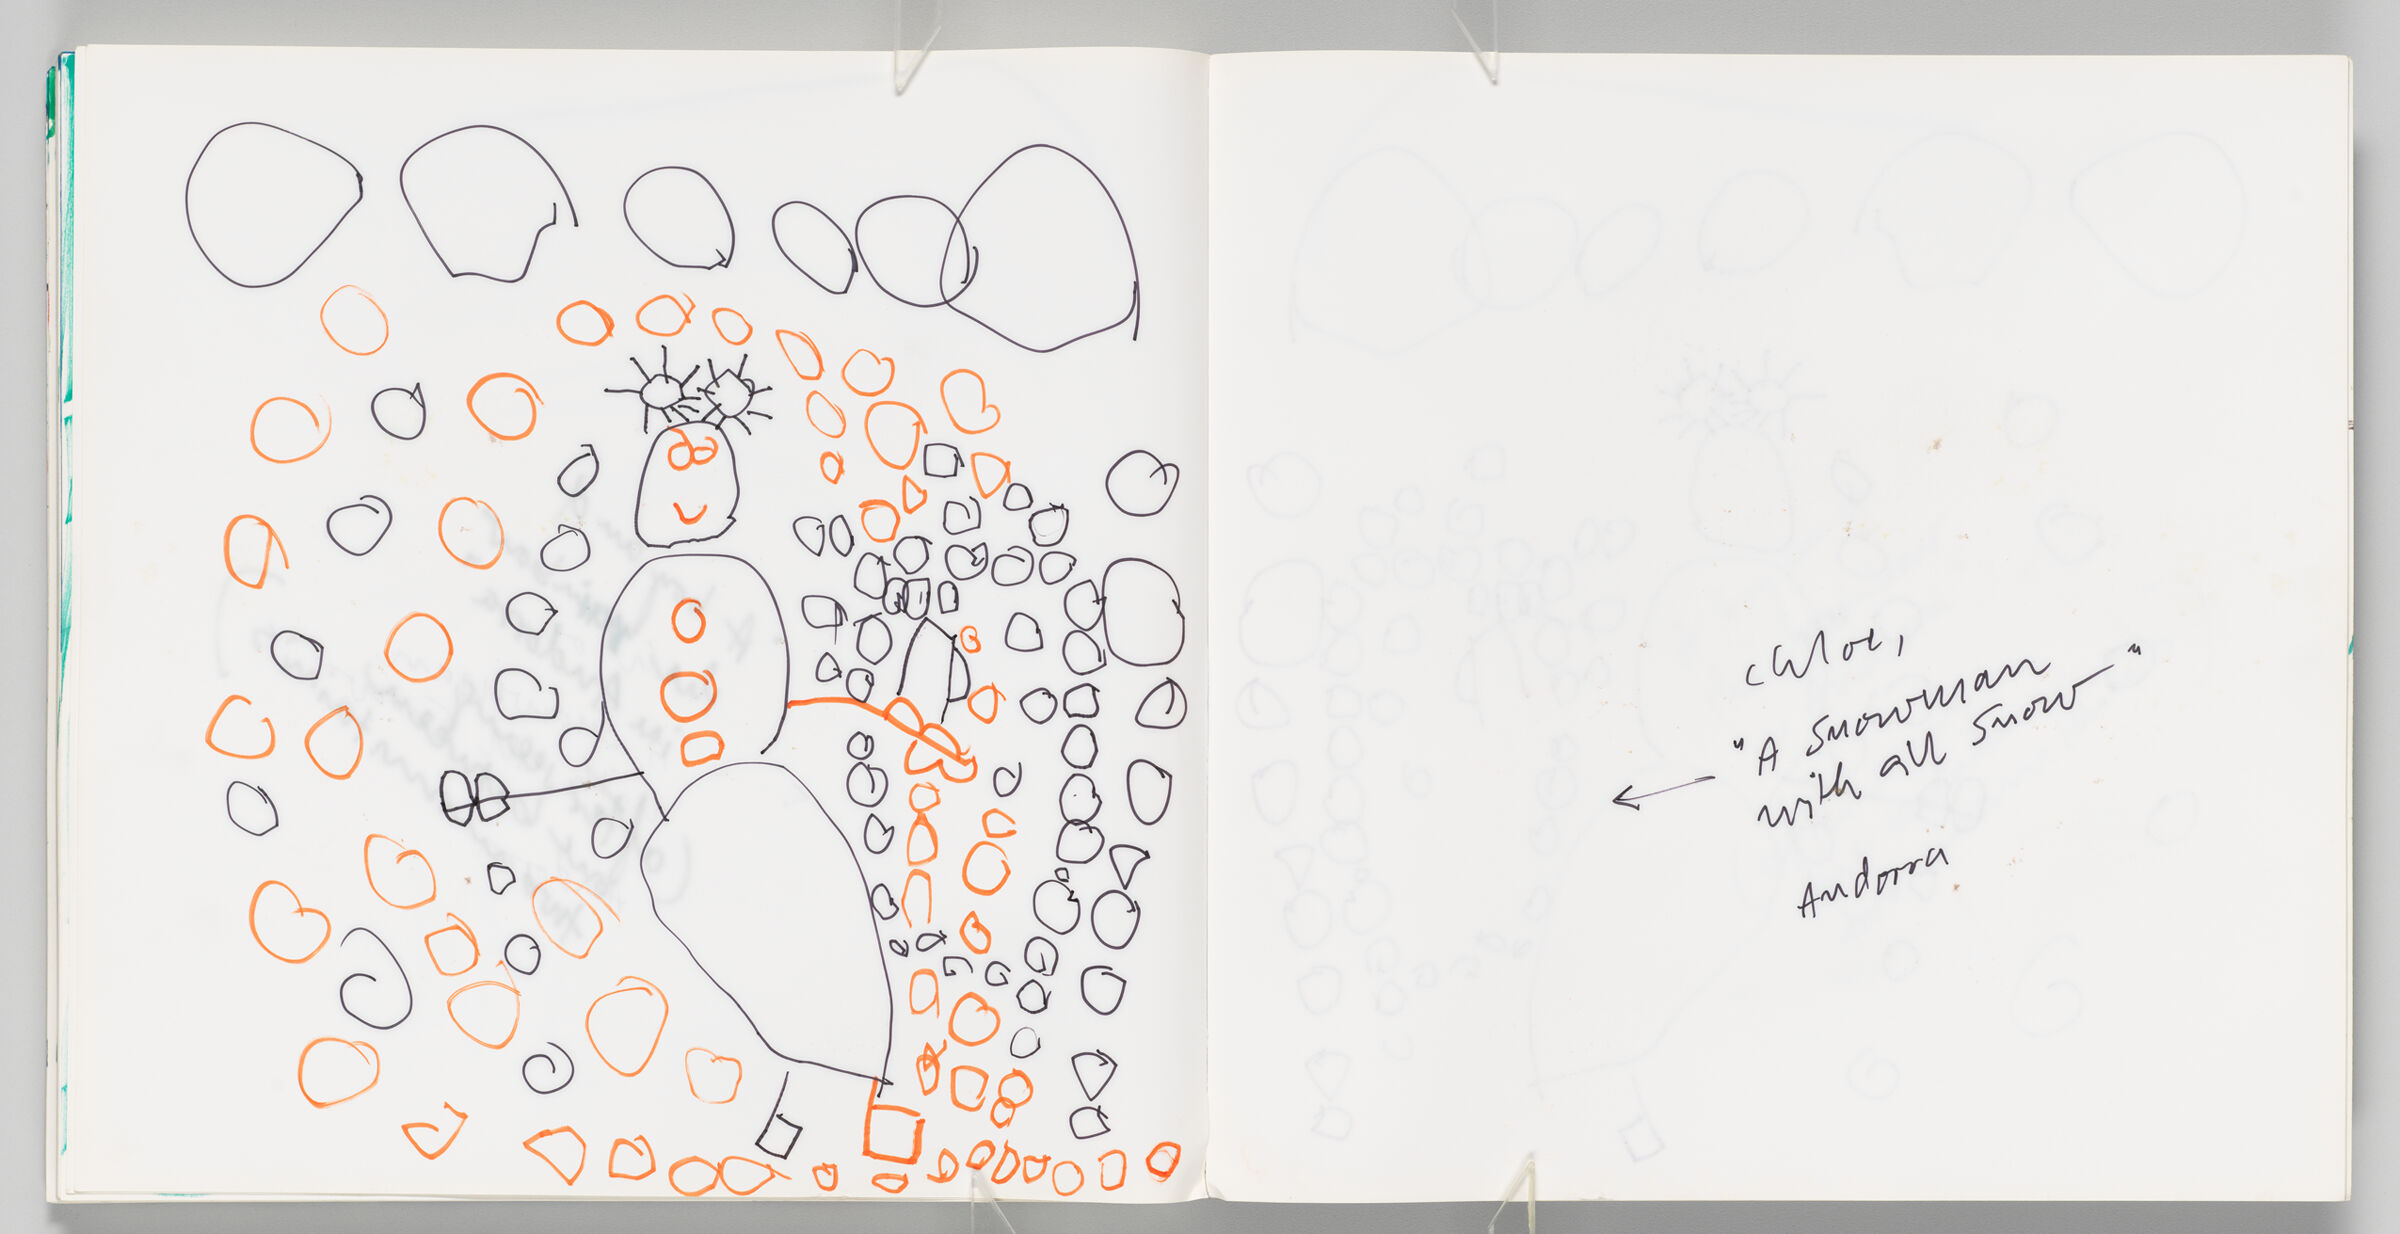 Untitled (Drawing By Piene's Daughter, Left Page); Untitled (Bleed-Through Of Following Page With Title For Drawing, Right Page)